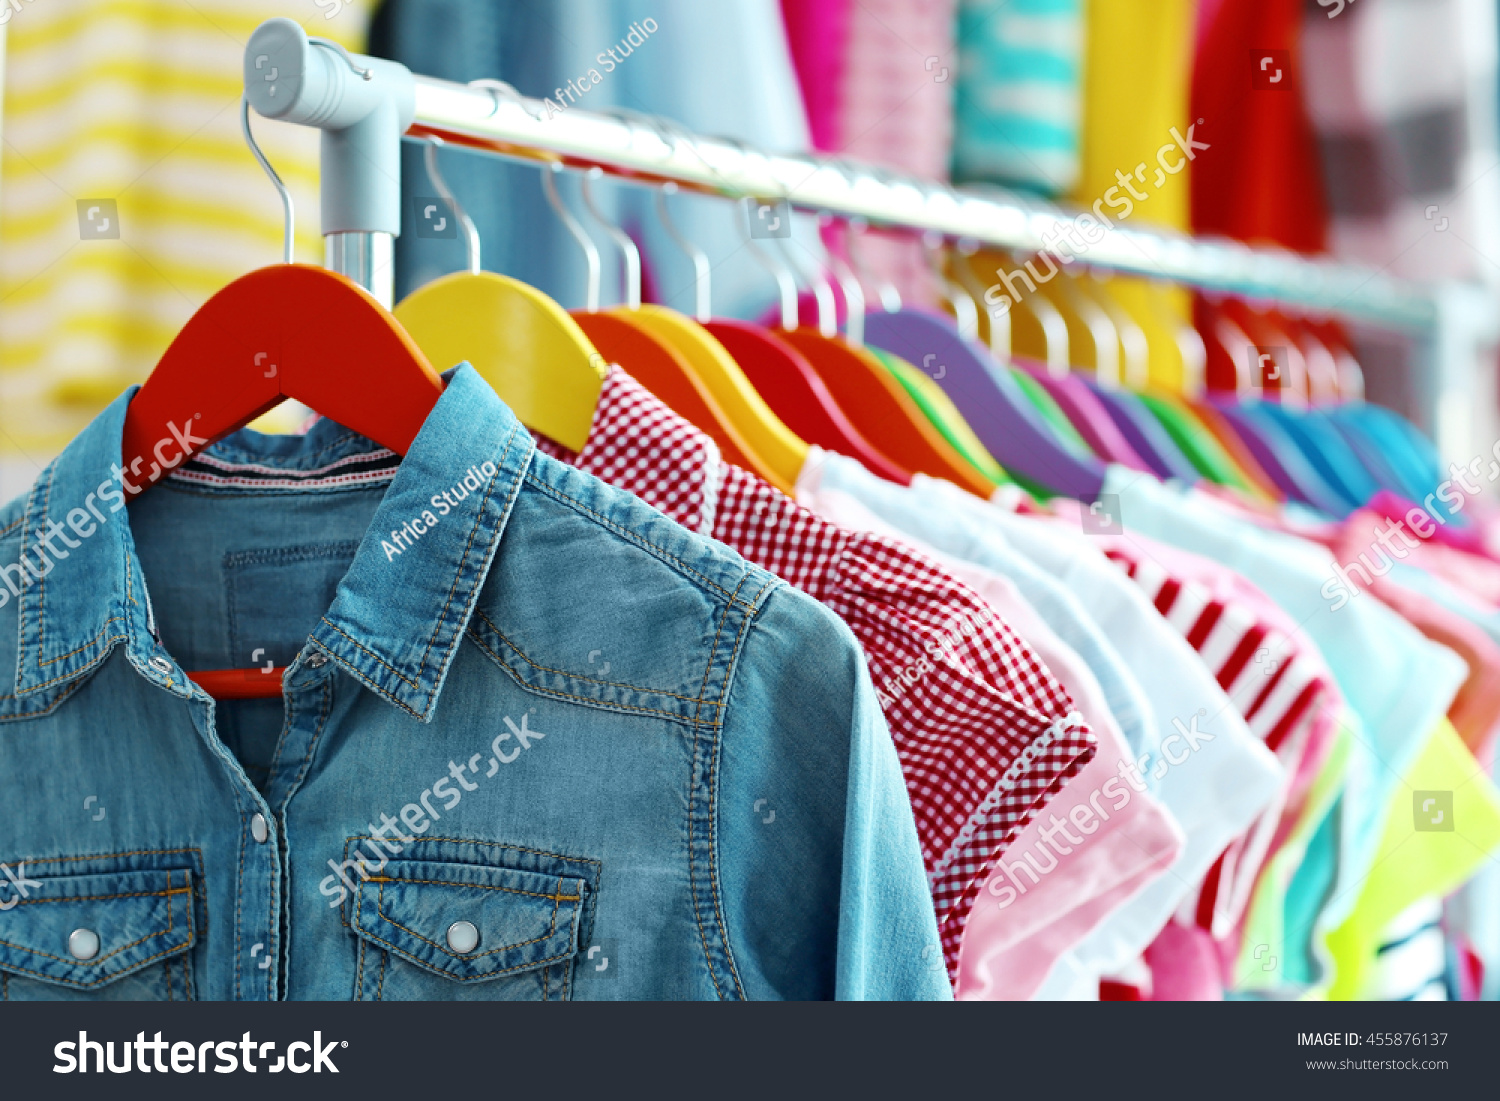 A rack of Clothing